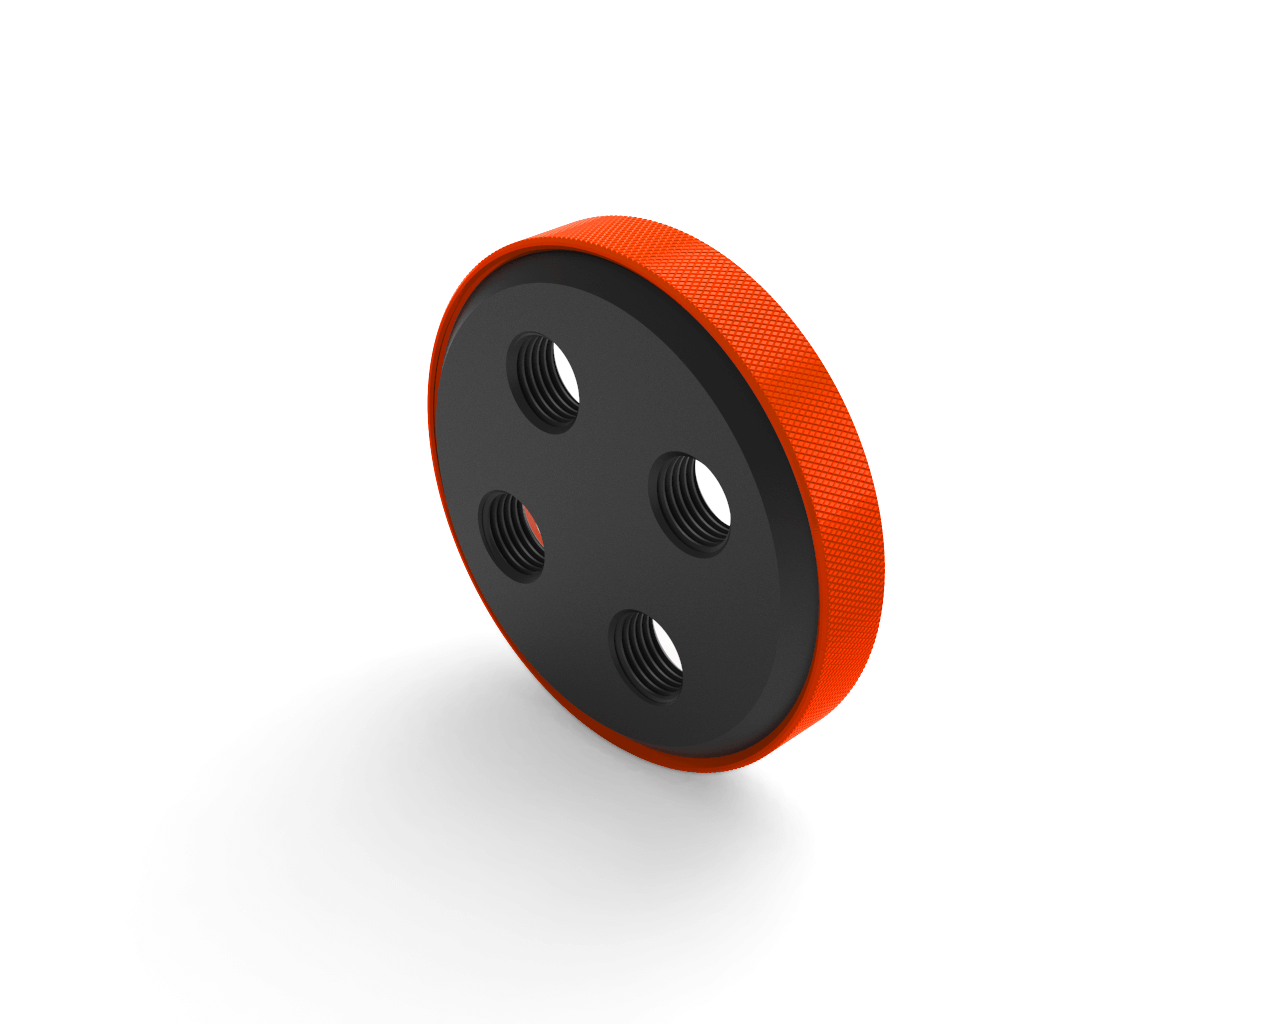 PrimoChill CTR Replacement SX Compression Ring - PrimoChill - KEEPING IT COOL UV Orange